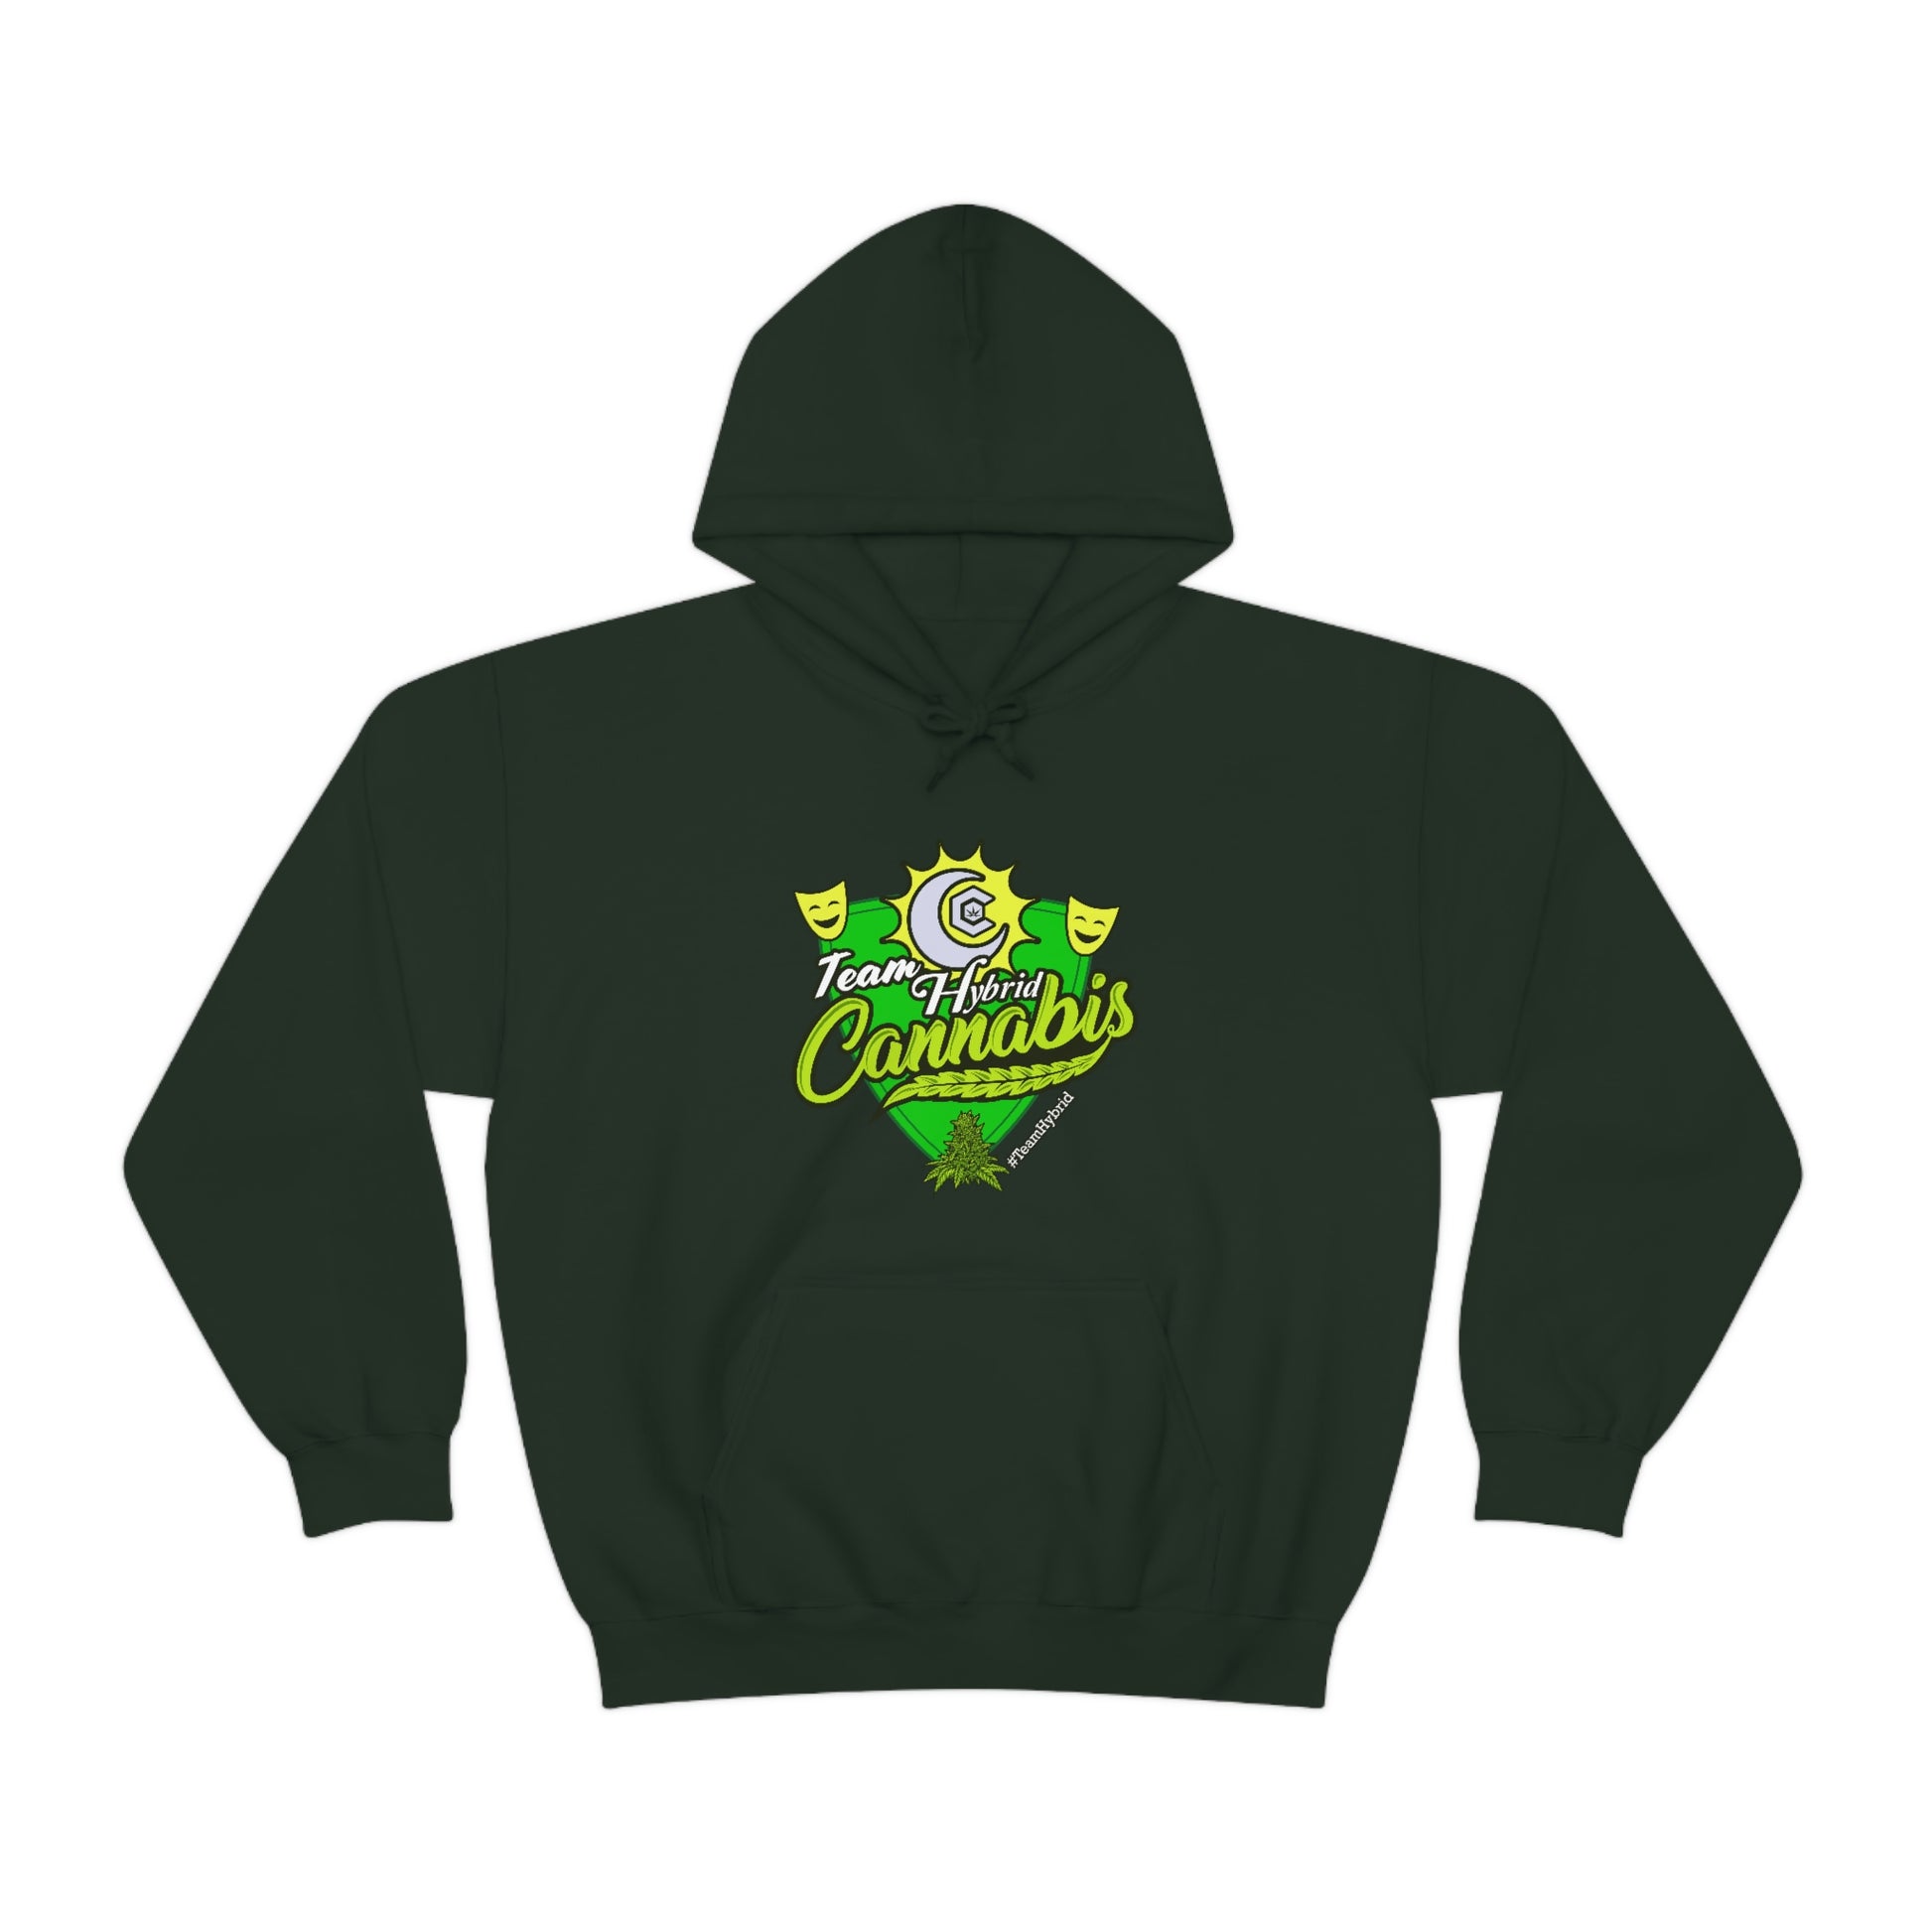 a green hooded sweatshirt with the word 'Team Hybrid Cannabis Pullover Hoodie' on it.